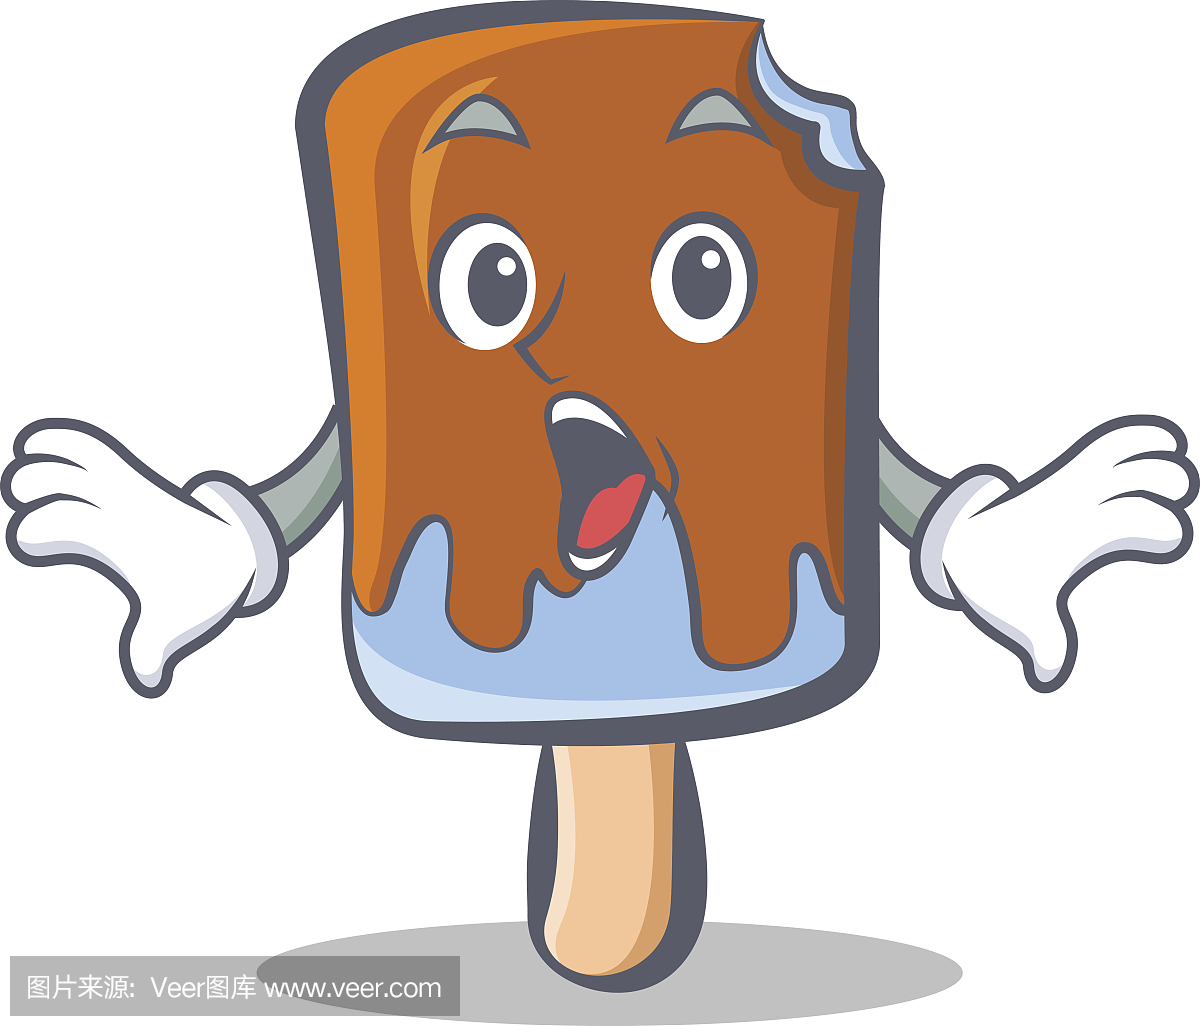 Surprised ice cream character cartoon vector a